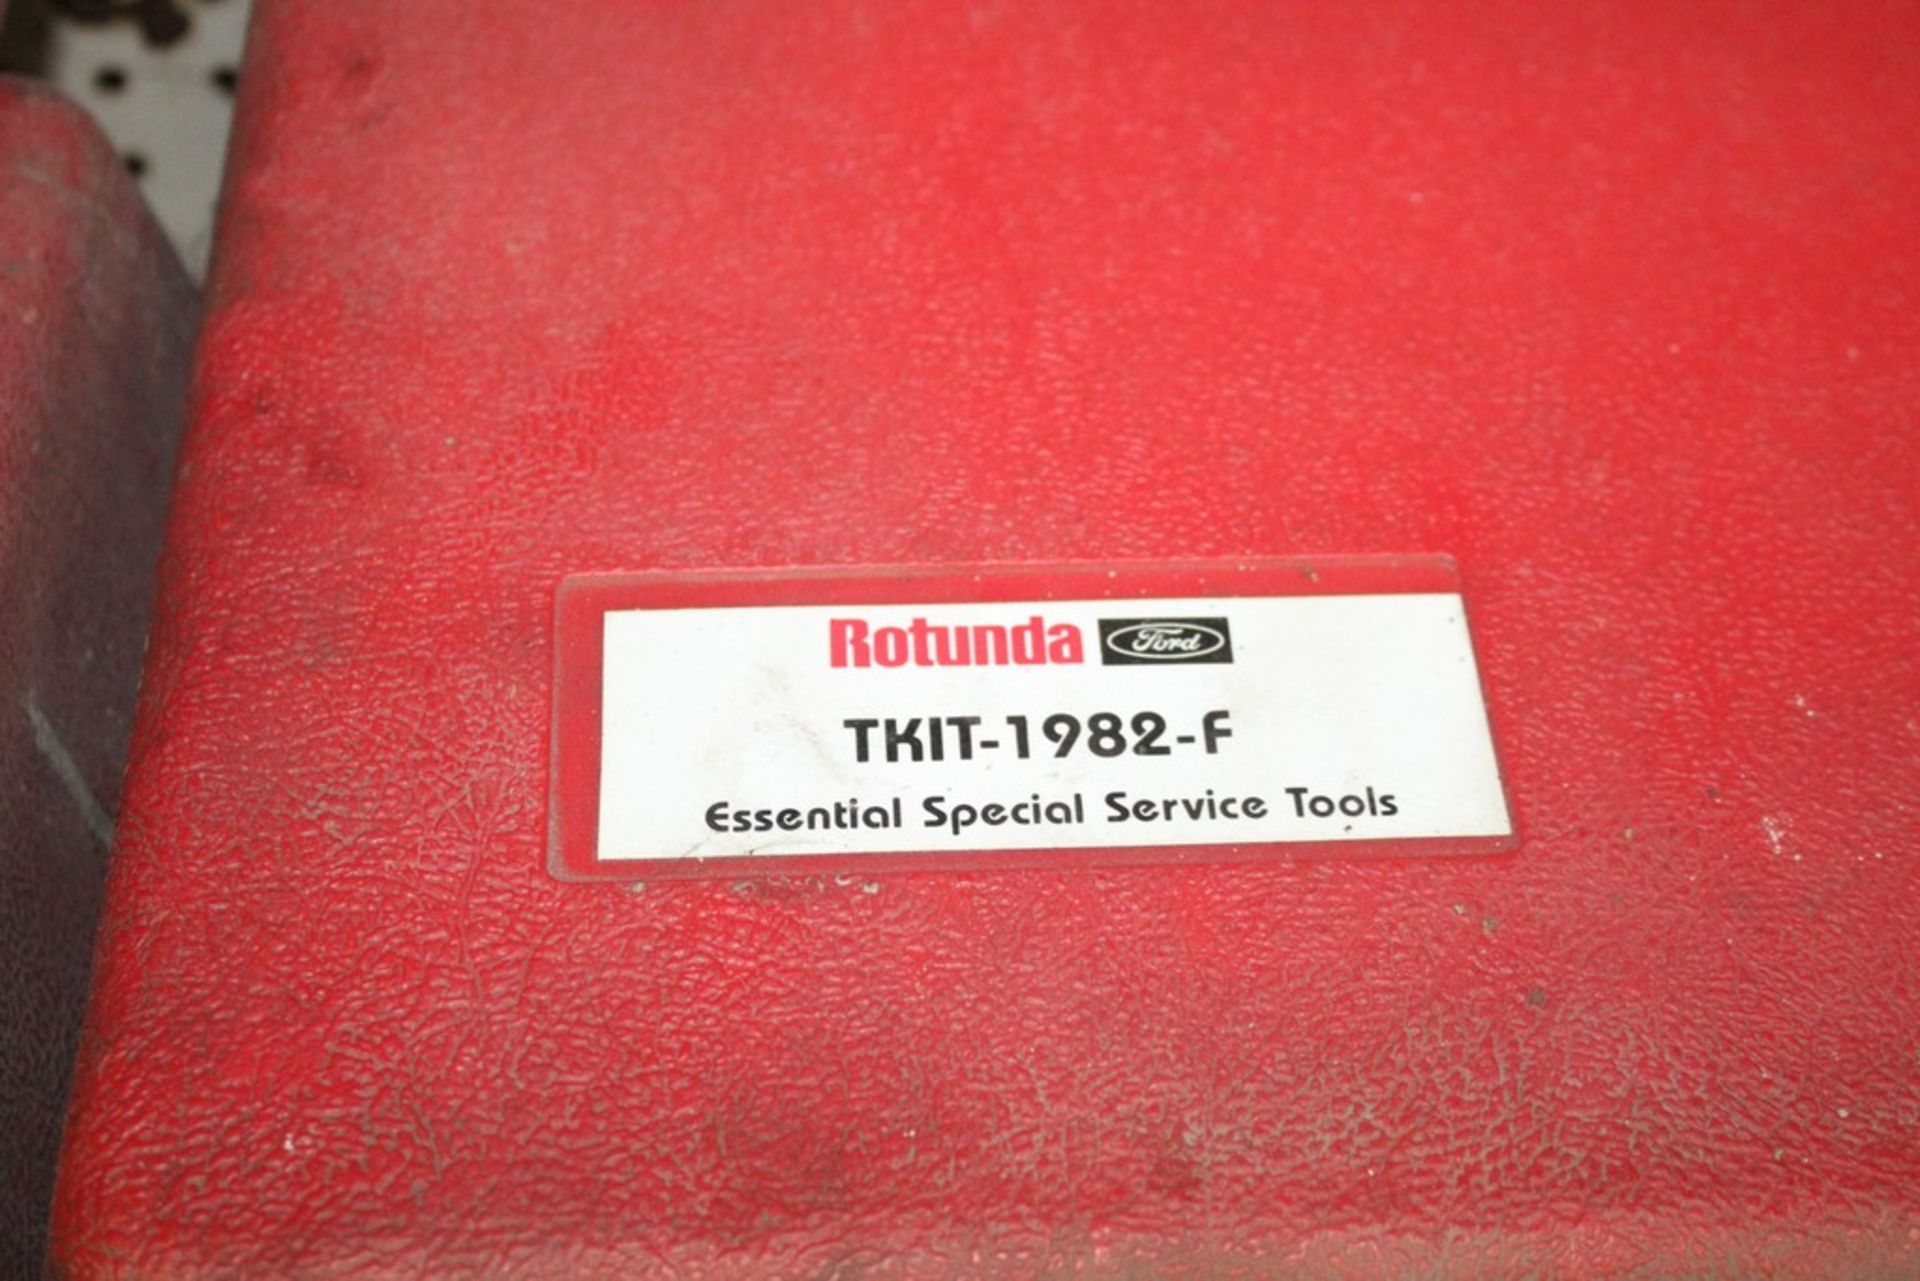 ASSORTED 1982 FORD ROTUNDA ESSENTIAL SERVICE TOOL SETS IN TWO CASES - Image 3 of 4